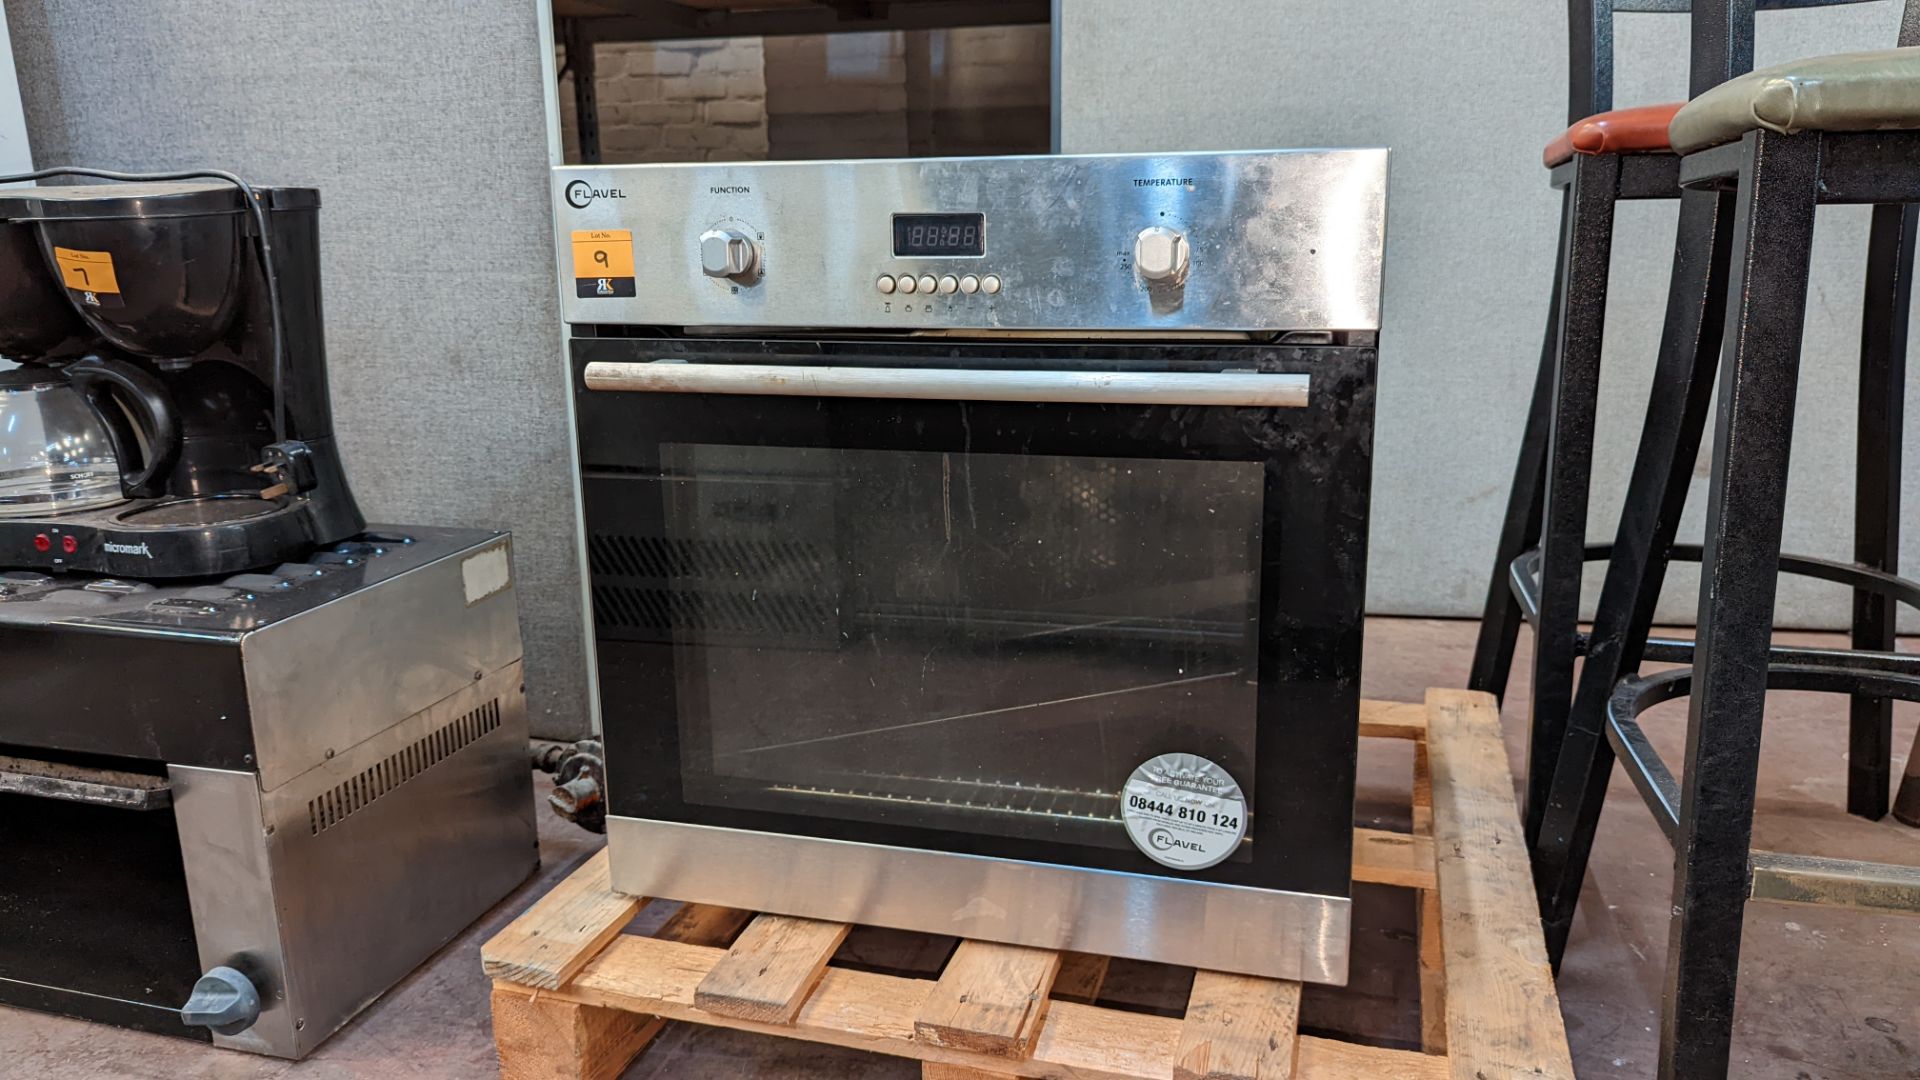 Flavel domestic integrated oven - Image 4 of 6